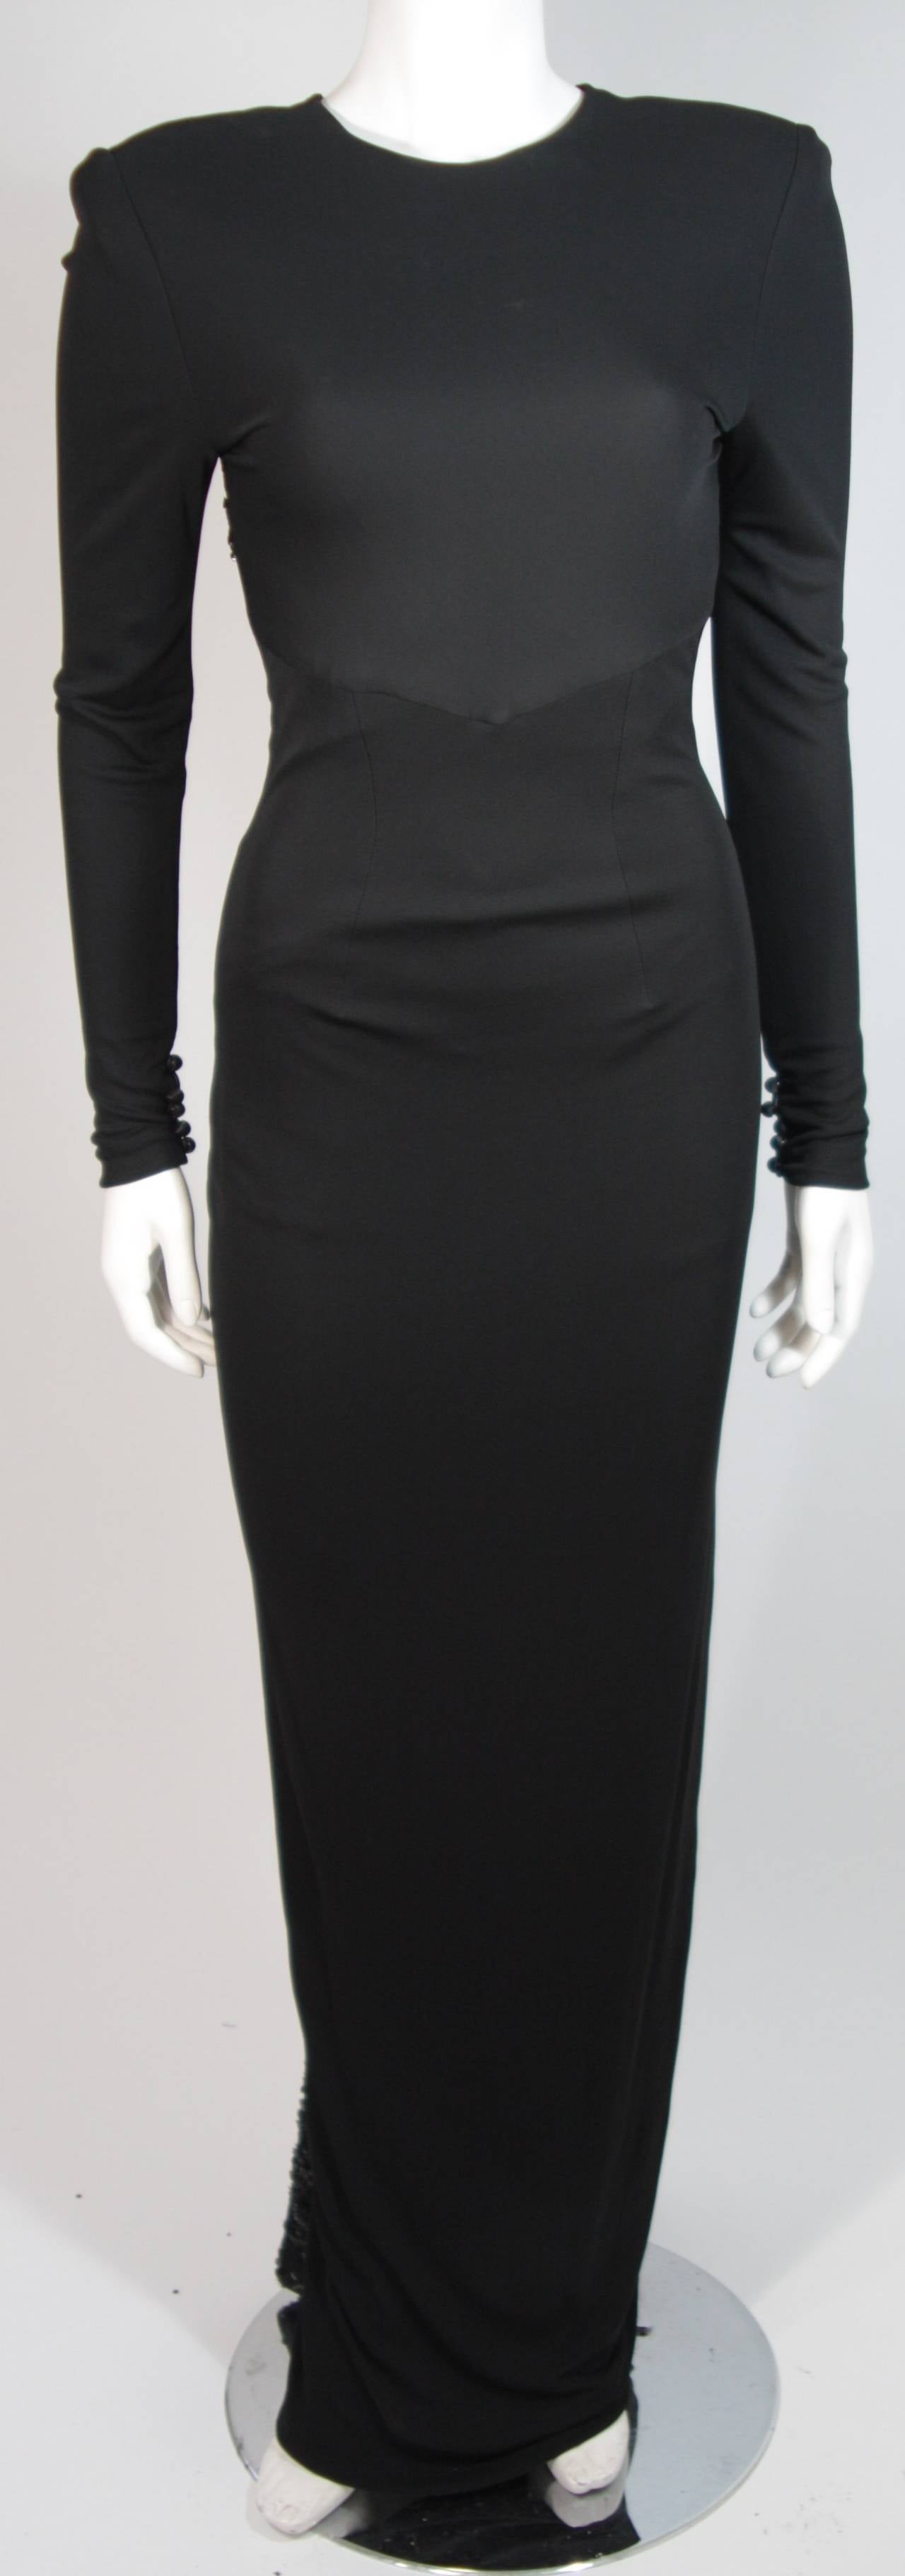 This Vicky Tiel gown is composed of a black jersey and features sequin lace accents.  There are padded shoulders. There is a center back zipper closure for ease of access. In excellent condition. Made in France.

This item is from the personal